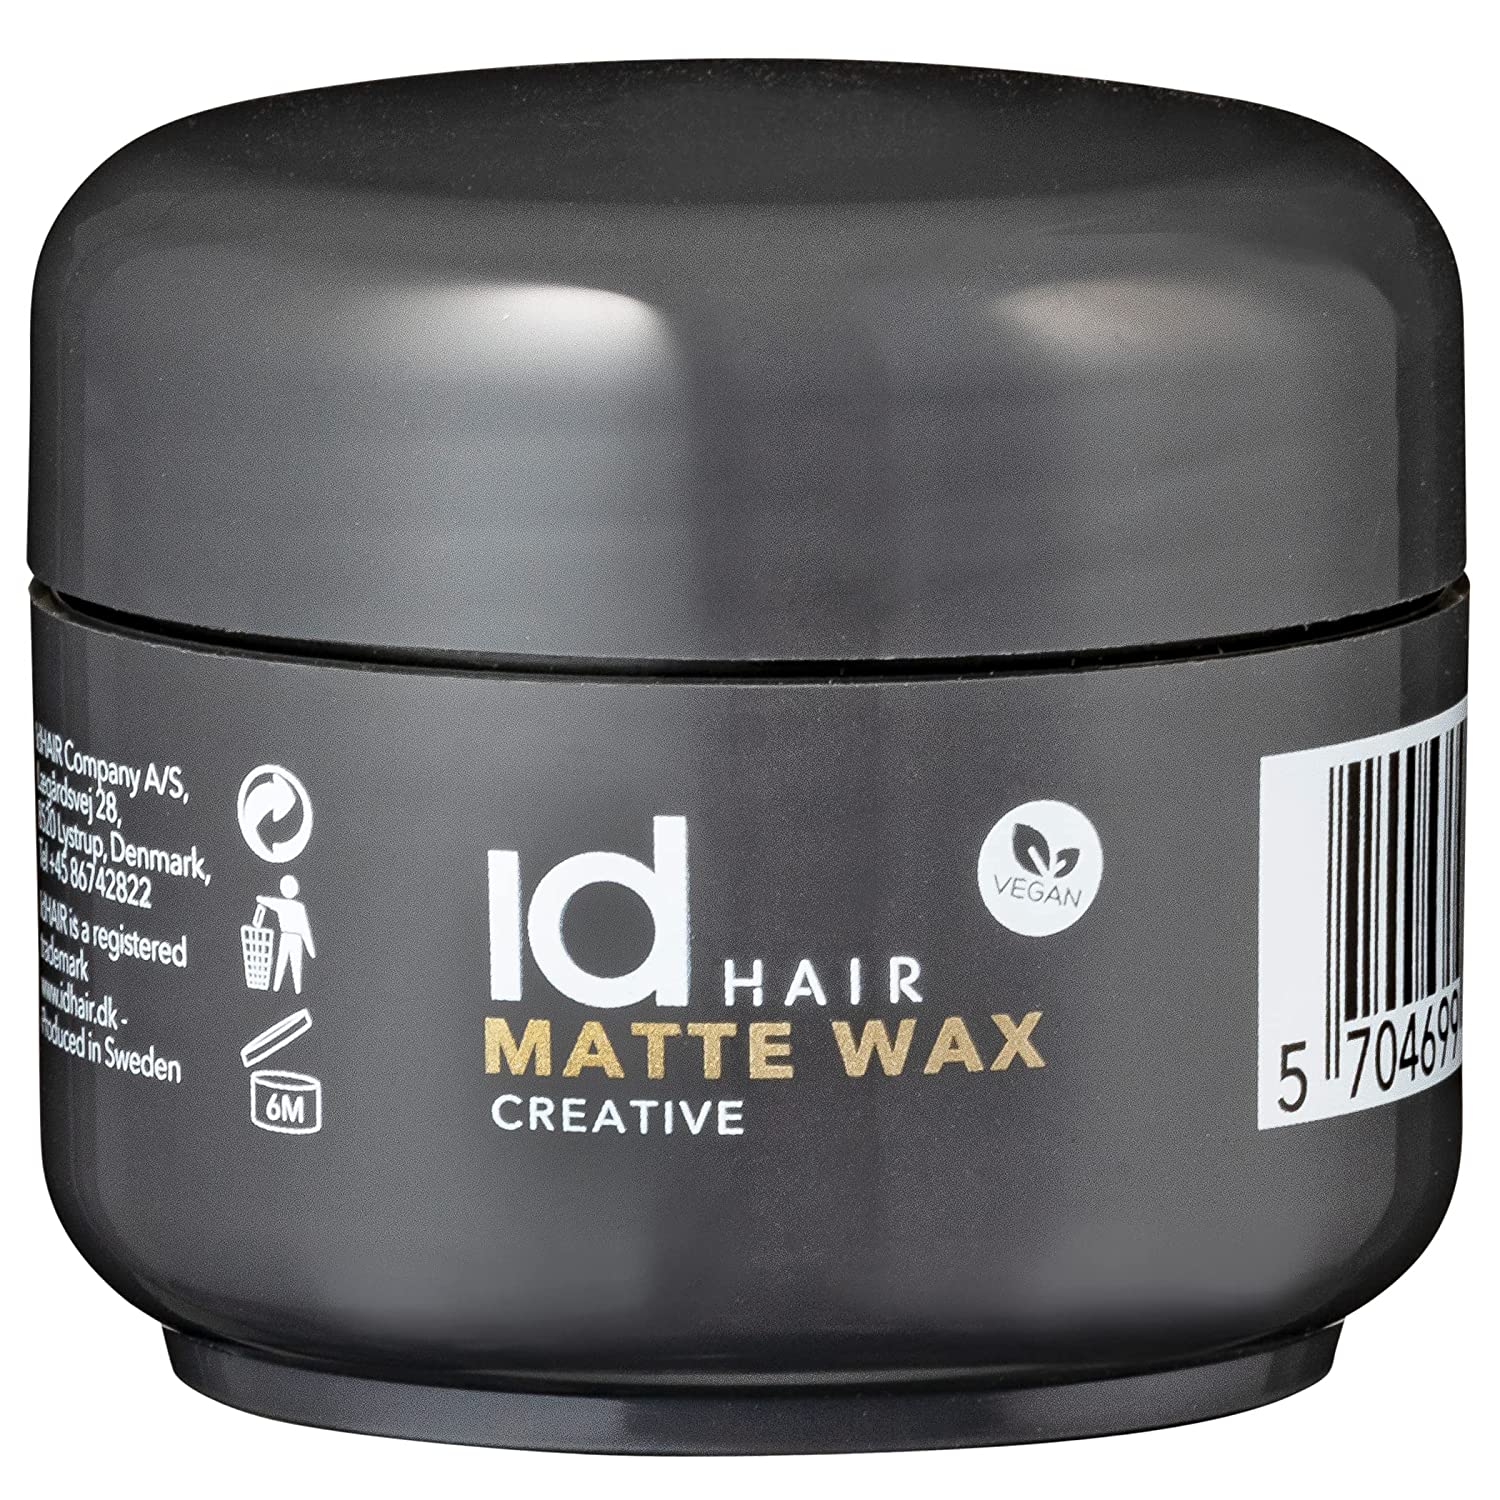 ID Hair - Matte Wax - Matte Finish - Suitable for Short to Medium Hair - Travel Size - 30ml (1 Pack)